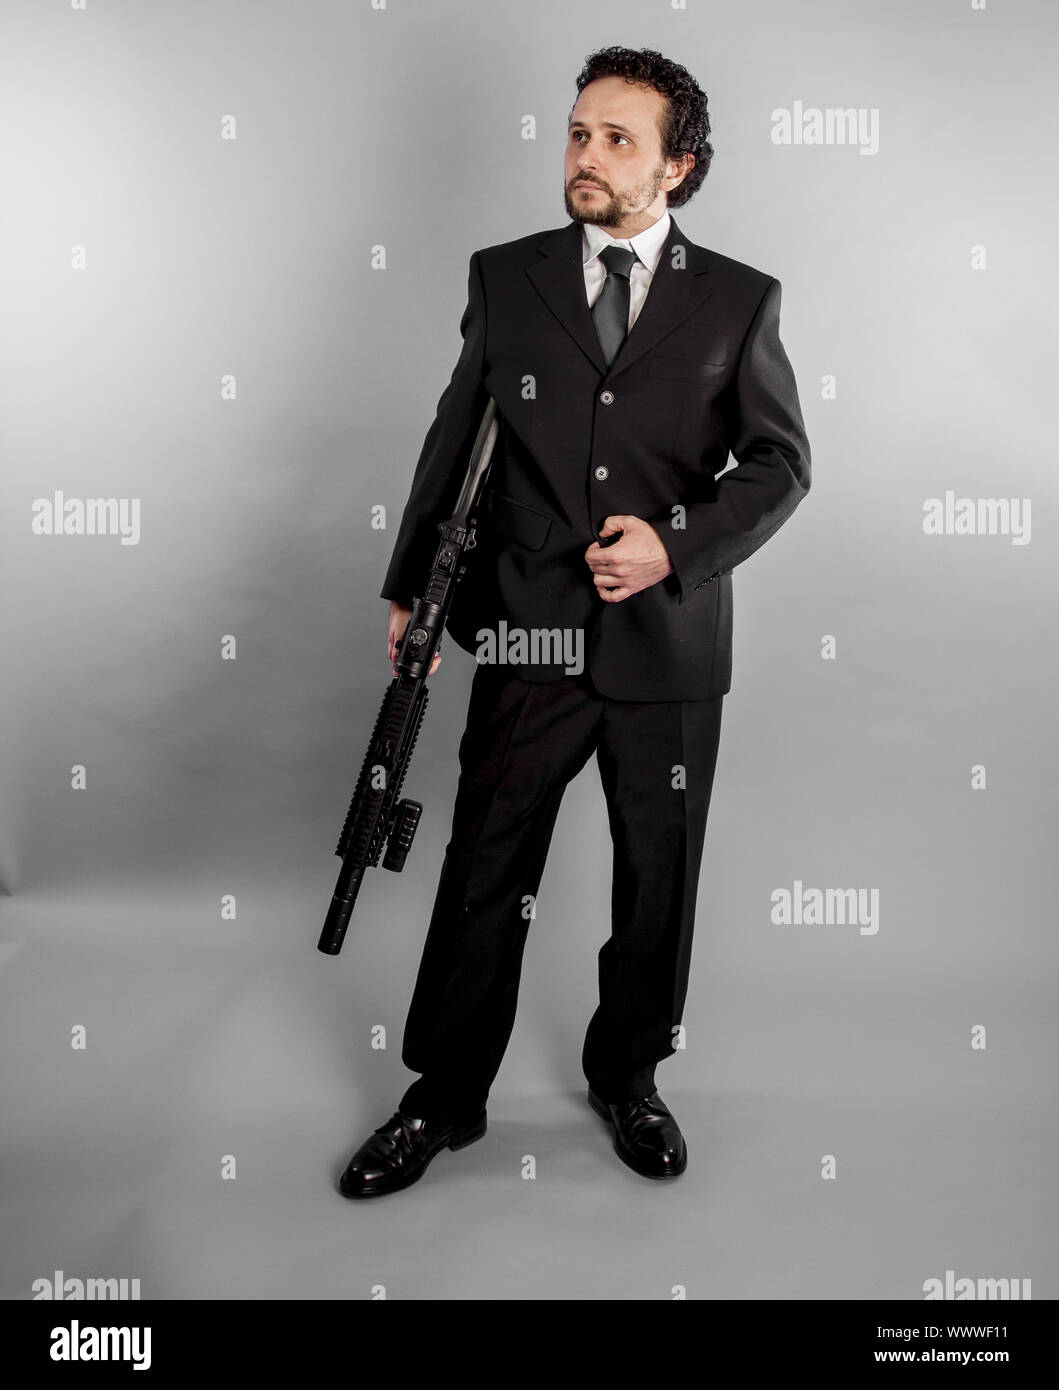 Businessman in black suit and armed with machine gun on gray background Stock Photo